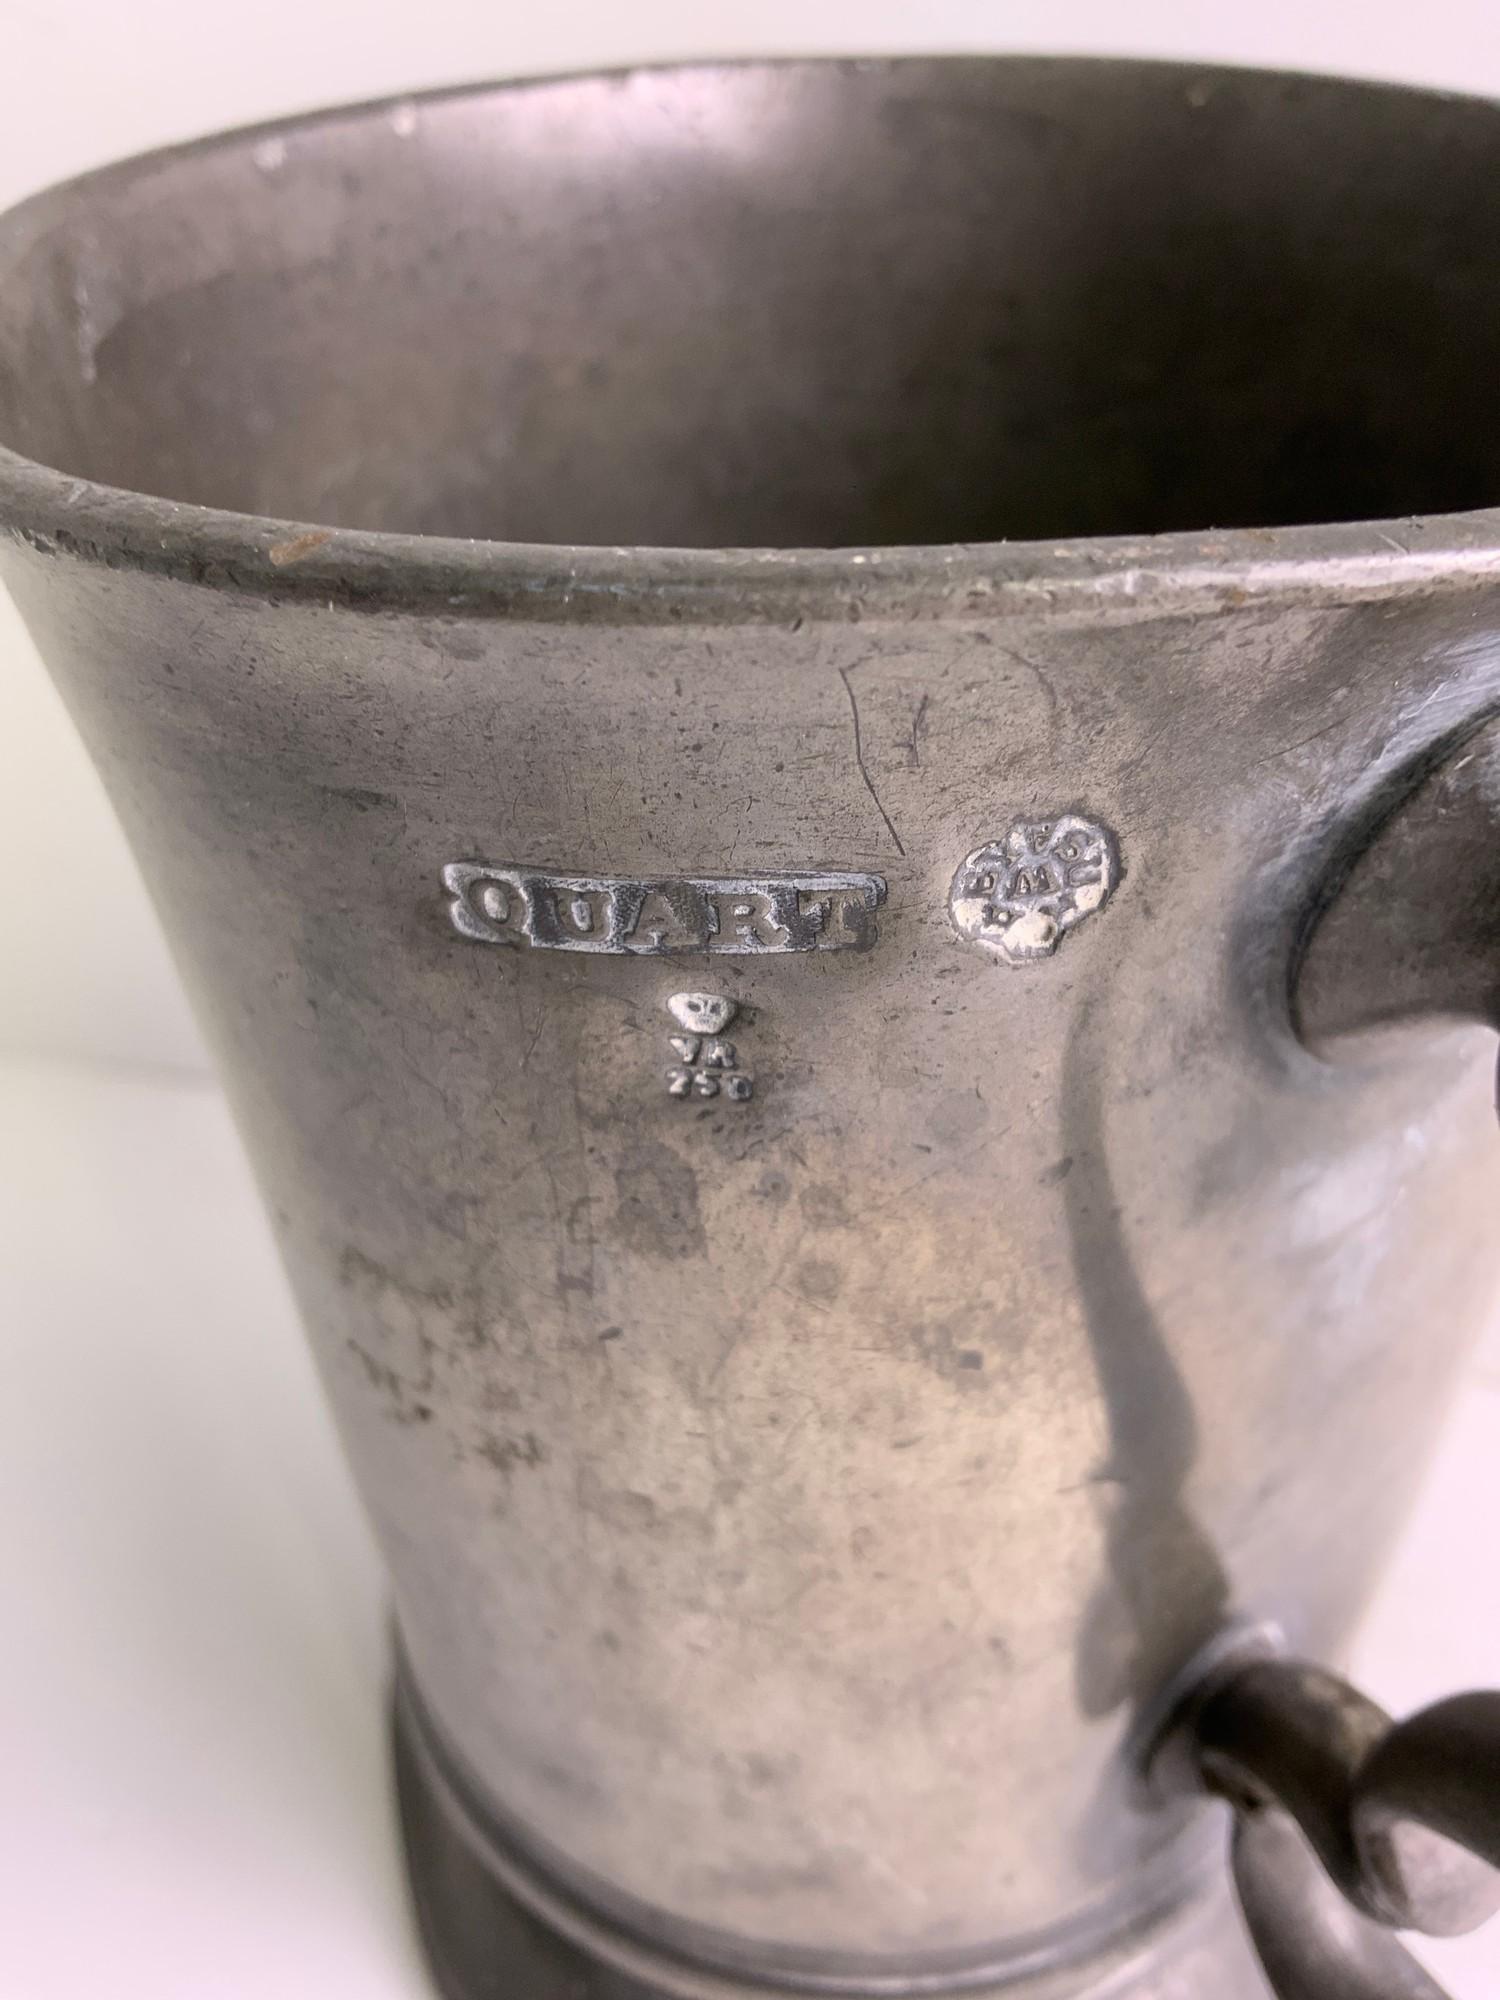 Victorian Pewter Tankard - 750 Excise Mark - Image 3 of 4